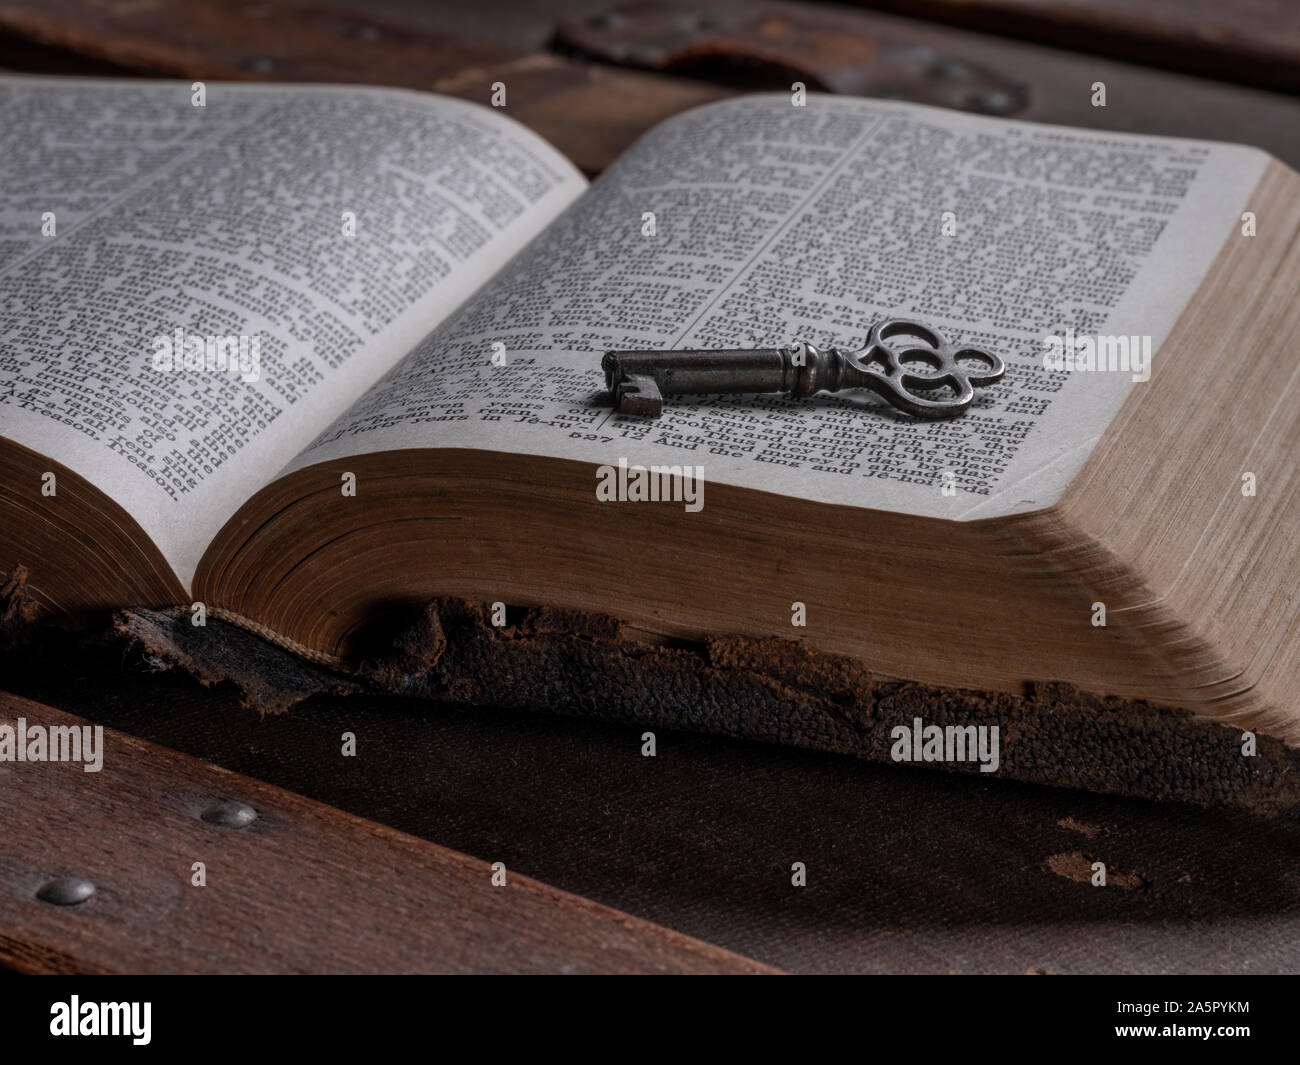 Key On Top Of Open Holy Bible Stock Photo